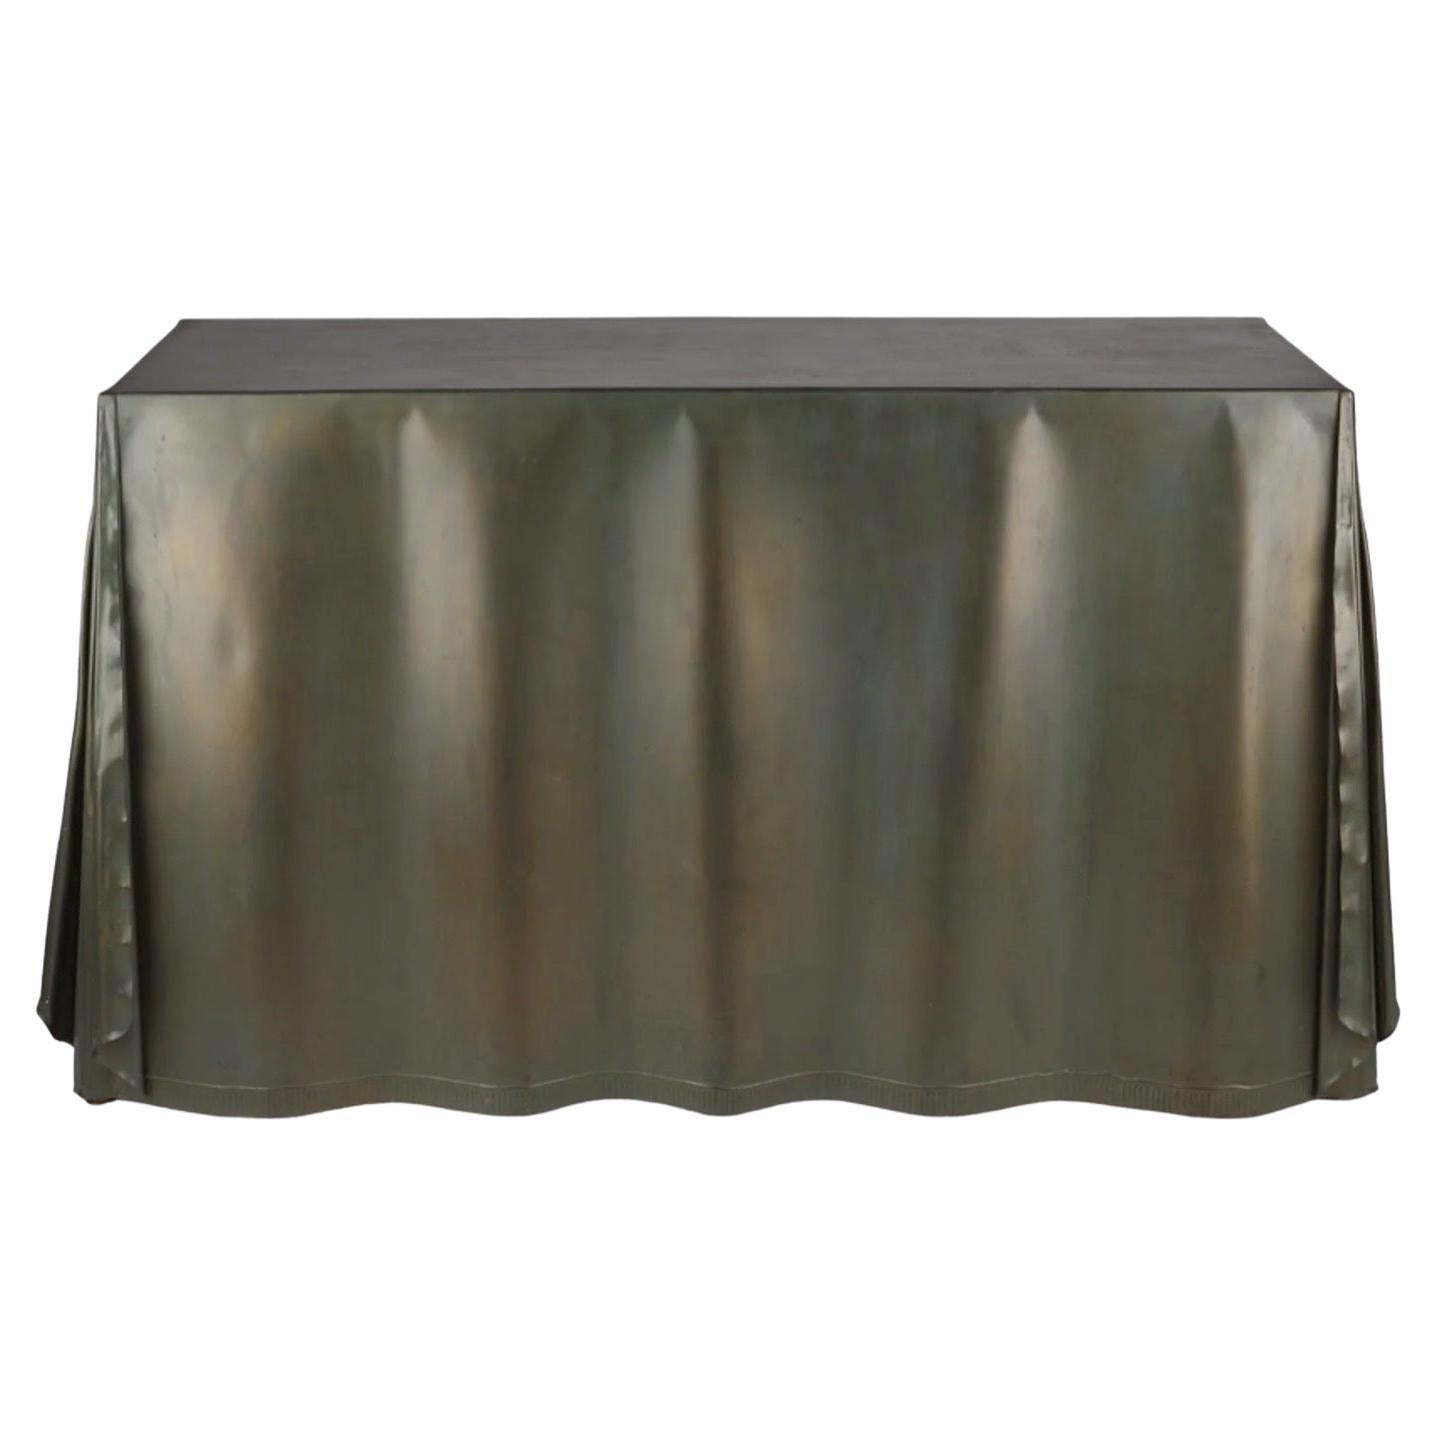 Console Table with Galvanized Steel with Bronze Finish